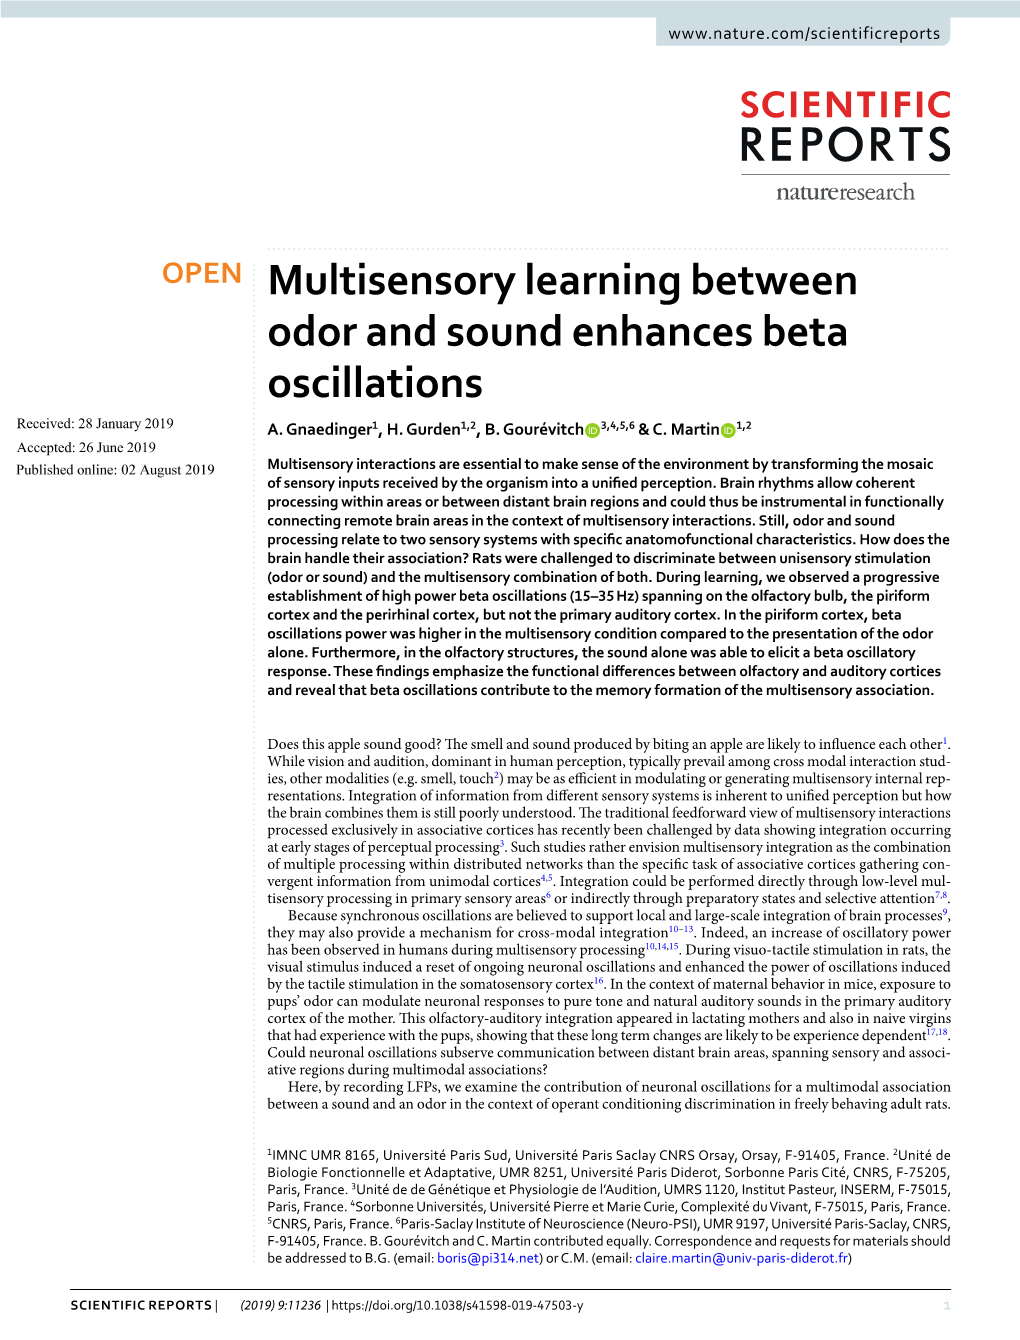 Multisensory Learning Between Odor and Sound Enhances Beta Oscillations Received: 28 January 2019 A